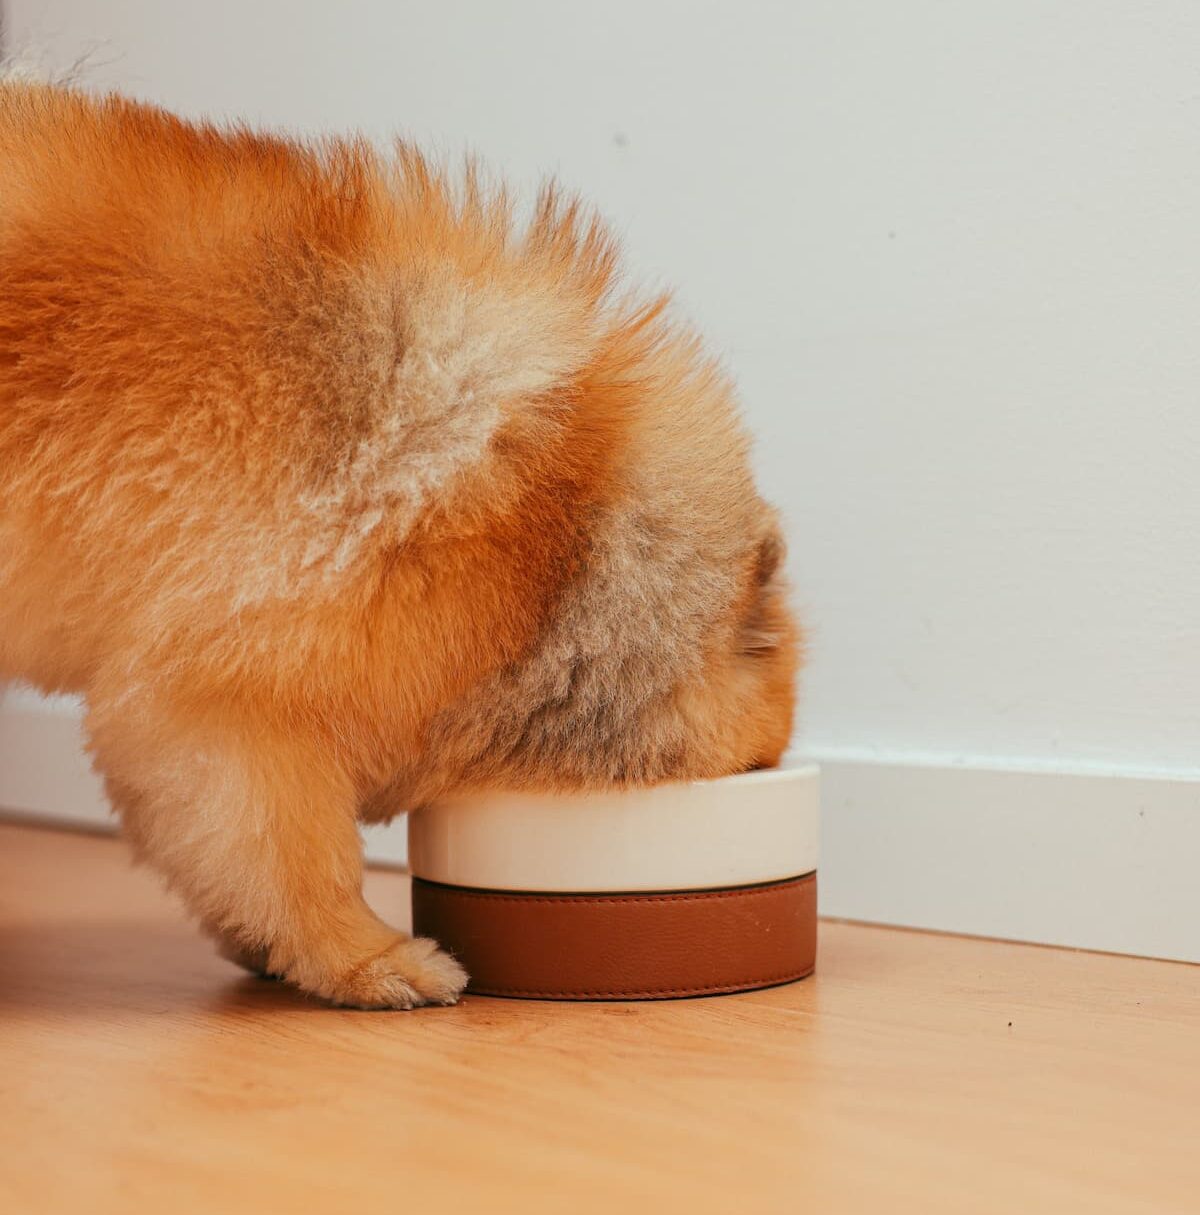 Dog with head in bowl